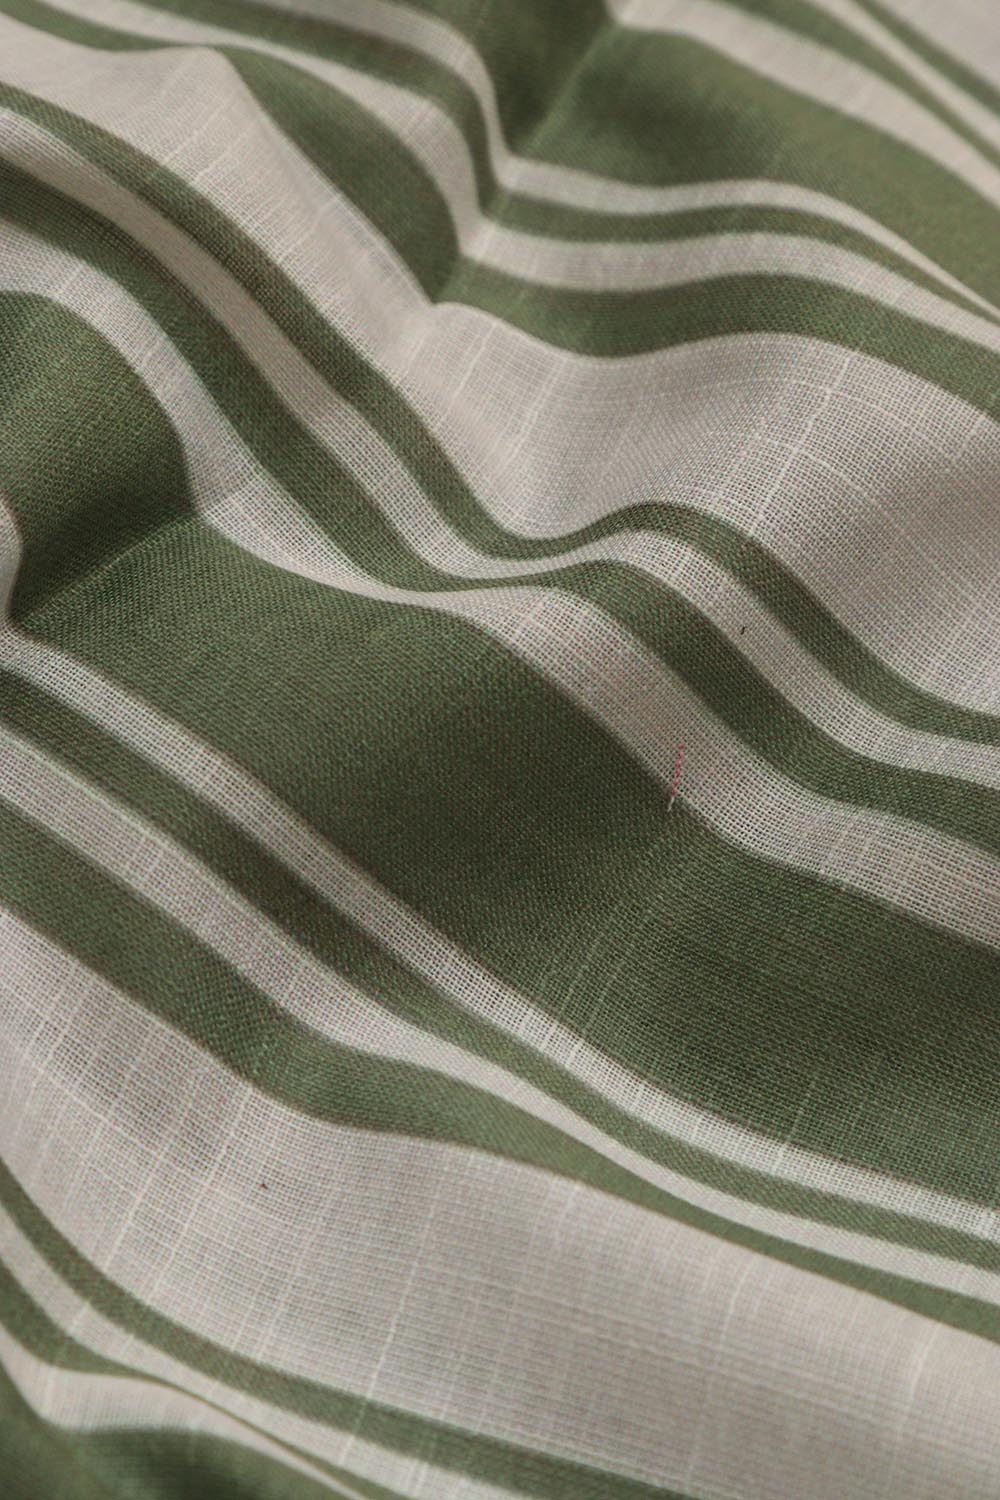 Vibrant Off White & Green Wrinkle Free Cotton Linen Digital Printed Fabric - Luxurion World